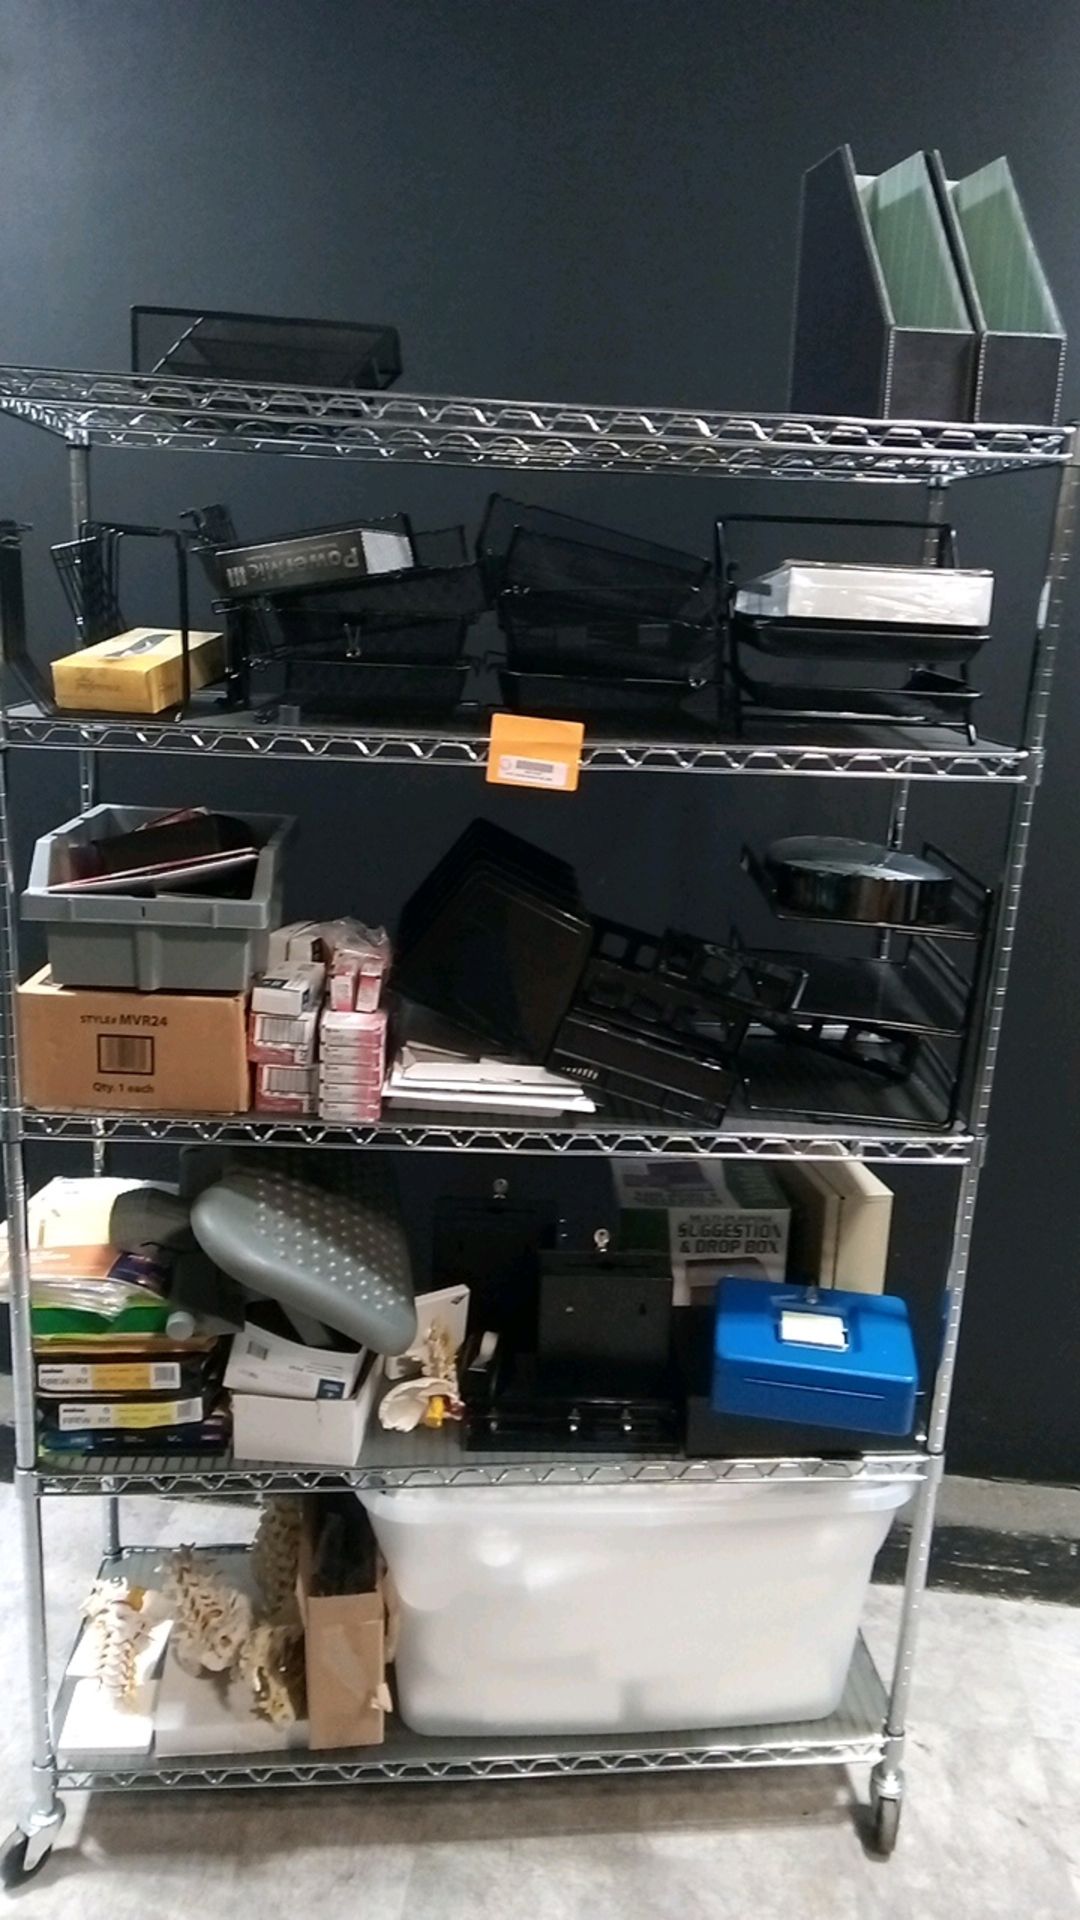 LOT OF MISC. OFFICE SUPPLIES LOCATED AT: 2440 GREENLEAF AVE, ELK GROVE VILLAGE IL